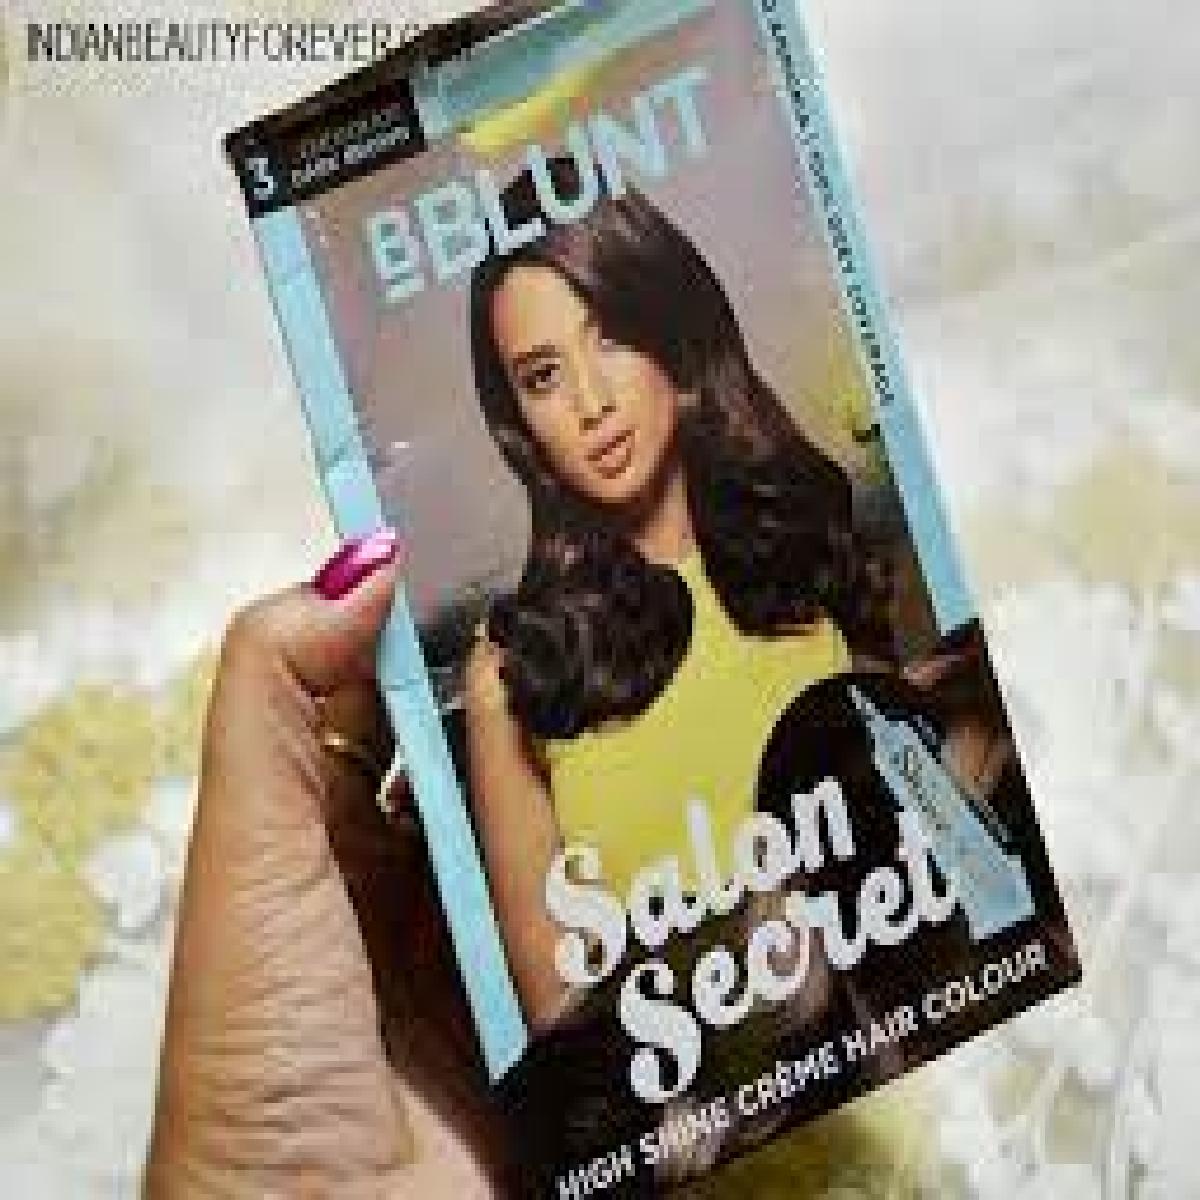 98 Percent of Females Claim BBlunt Salon Secret Hair Colour Provides the Best Hair Shine They Have Ever Experienced, BBlunt Survey Confirms